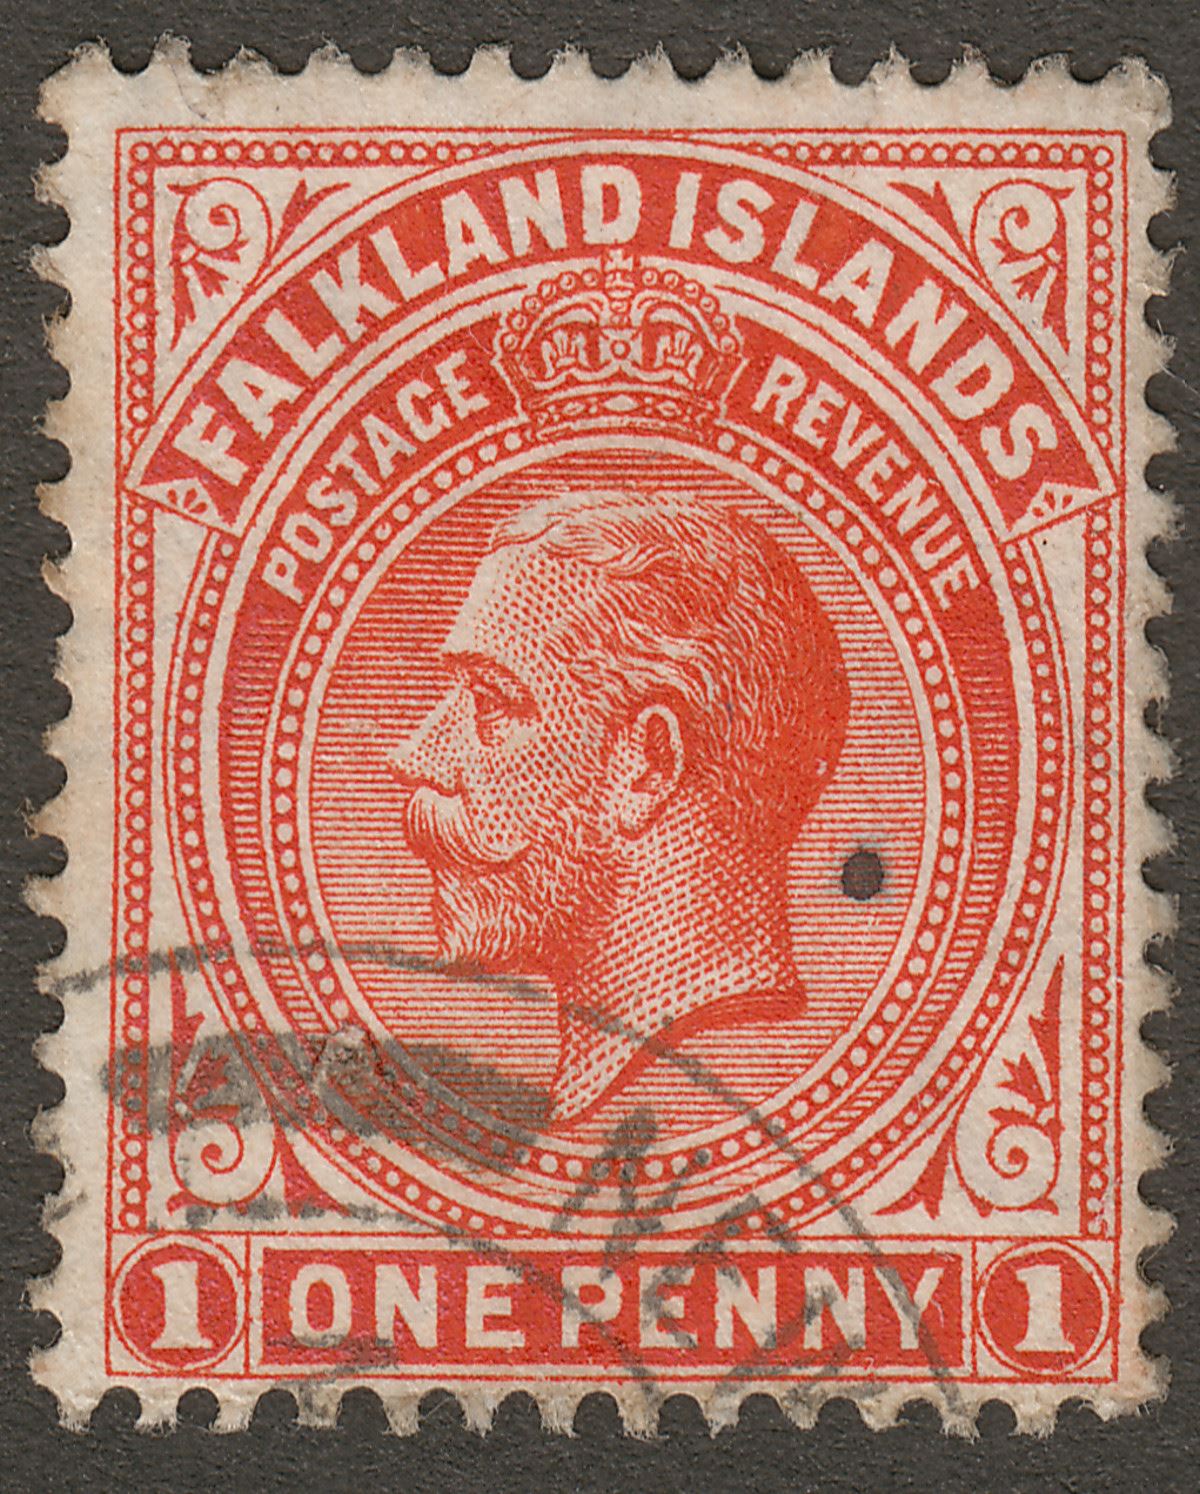 Falkland Islands c1912 KGV 1d Used with part NEW ISLAND Postmark